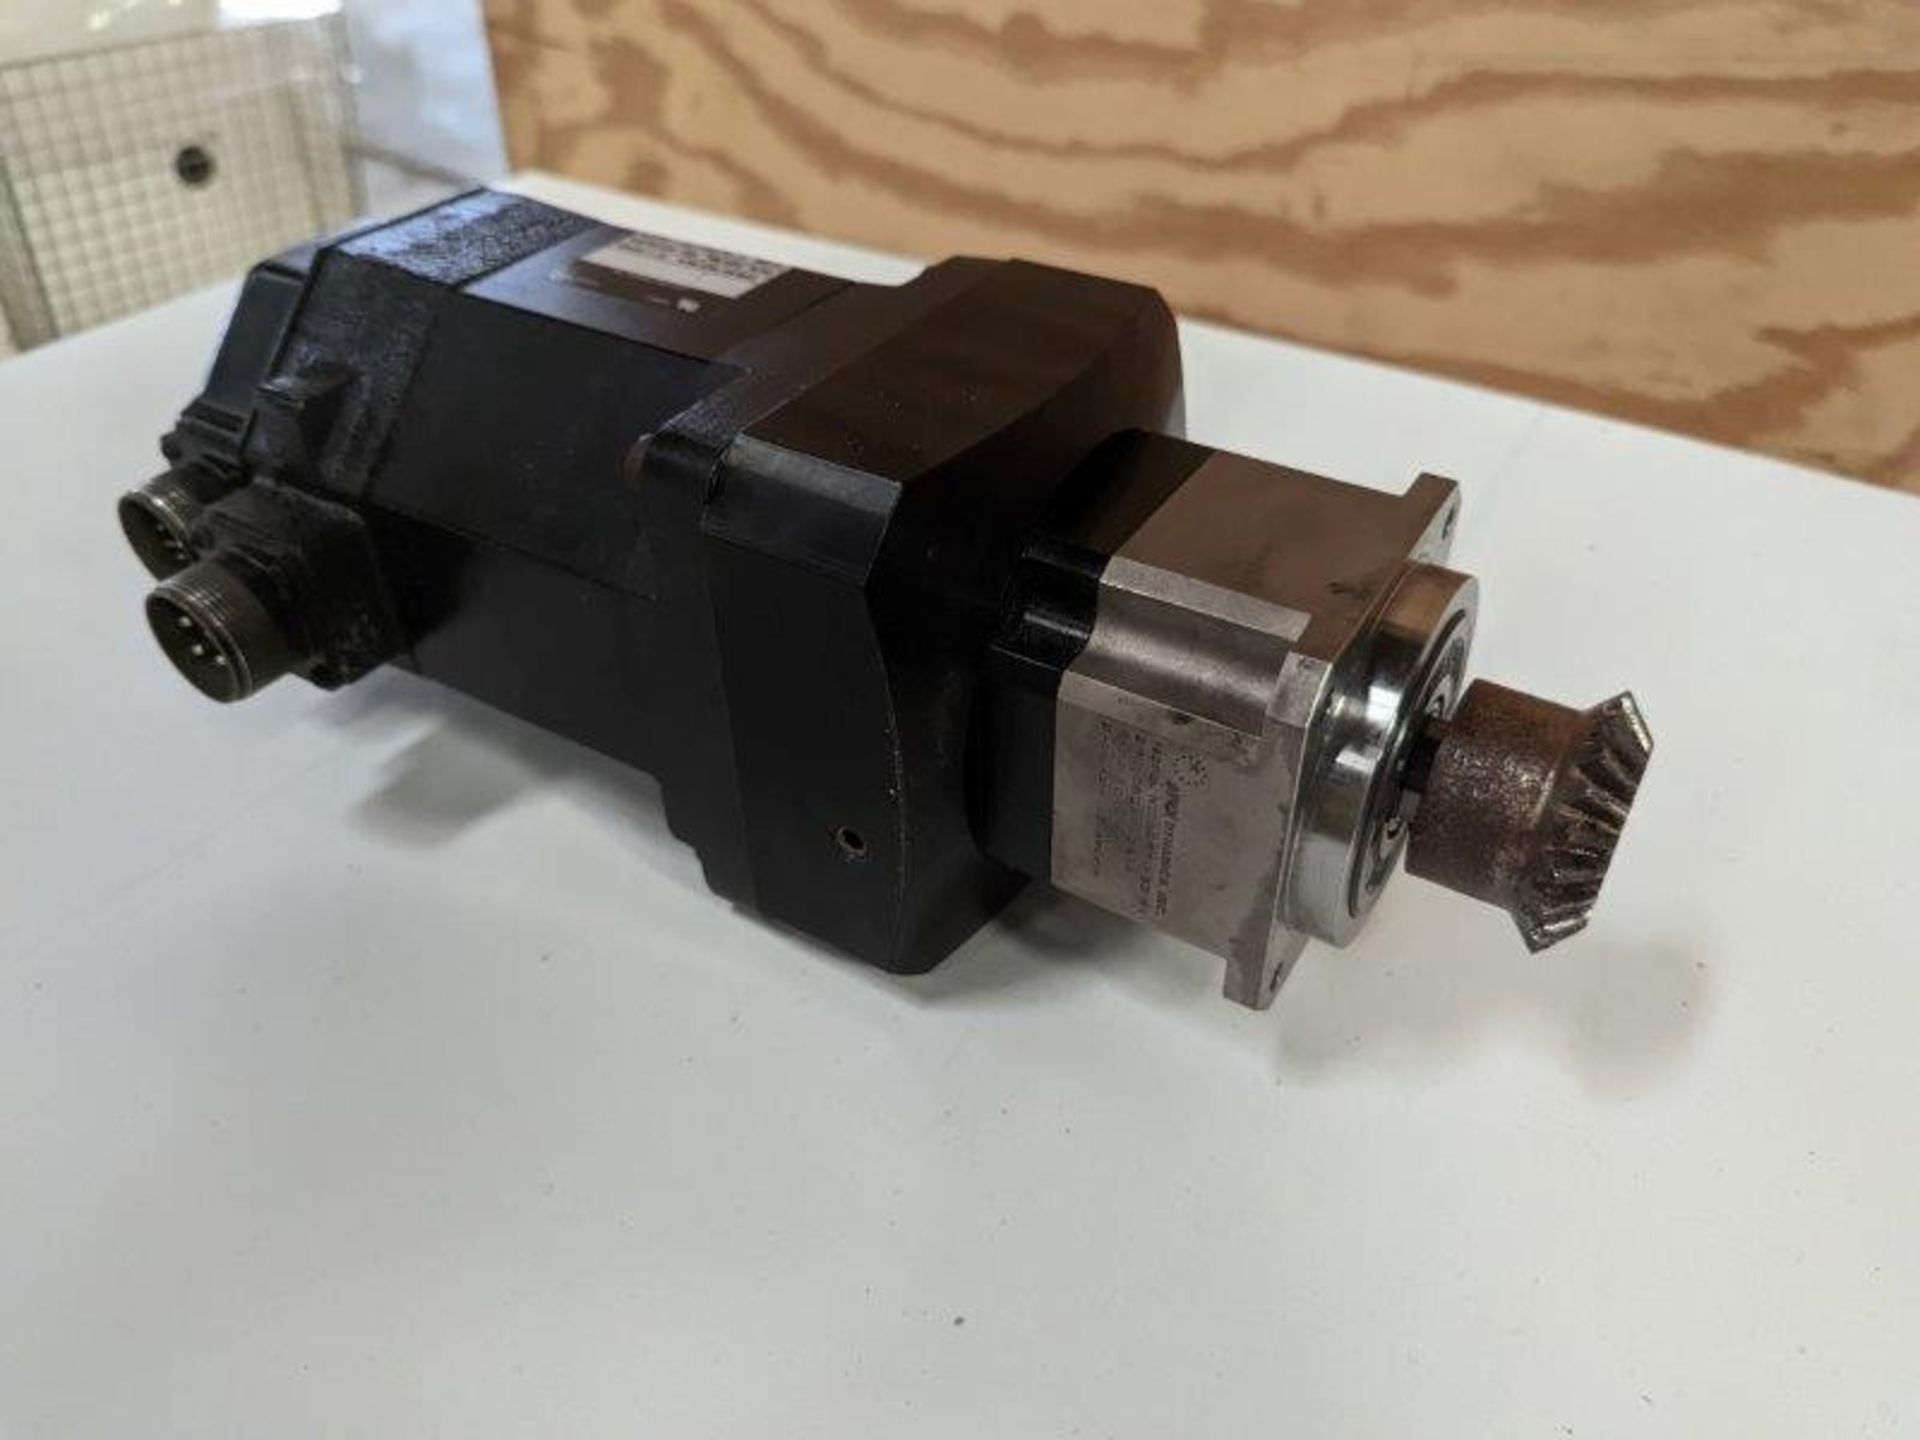 ALLEN-BRADLEY Servo Motor; Model F-4030-Q-H00AA; Max speed 4000 RPM; Includes attached APEX DYNAMICS - Image 2 of 10